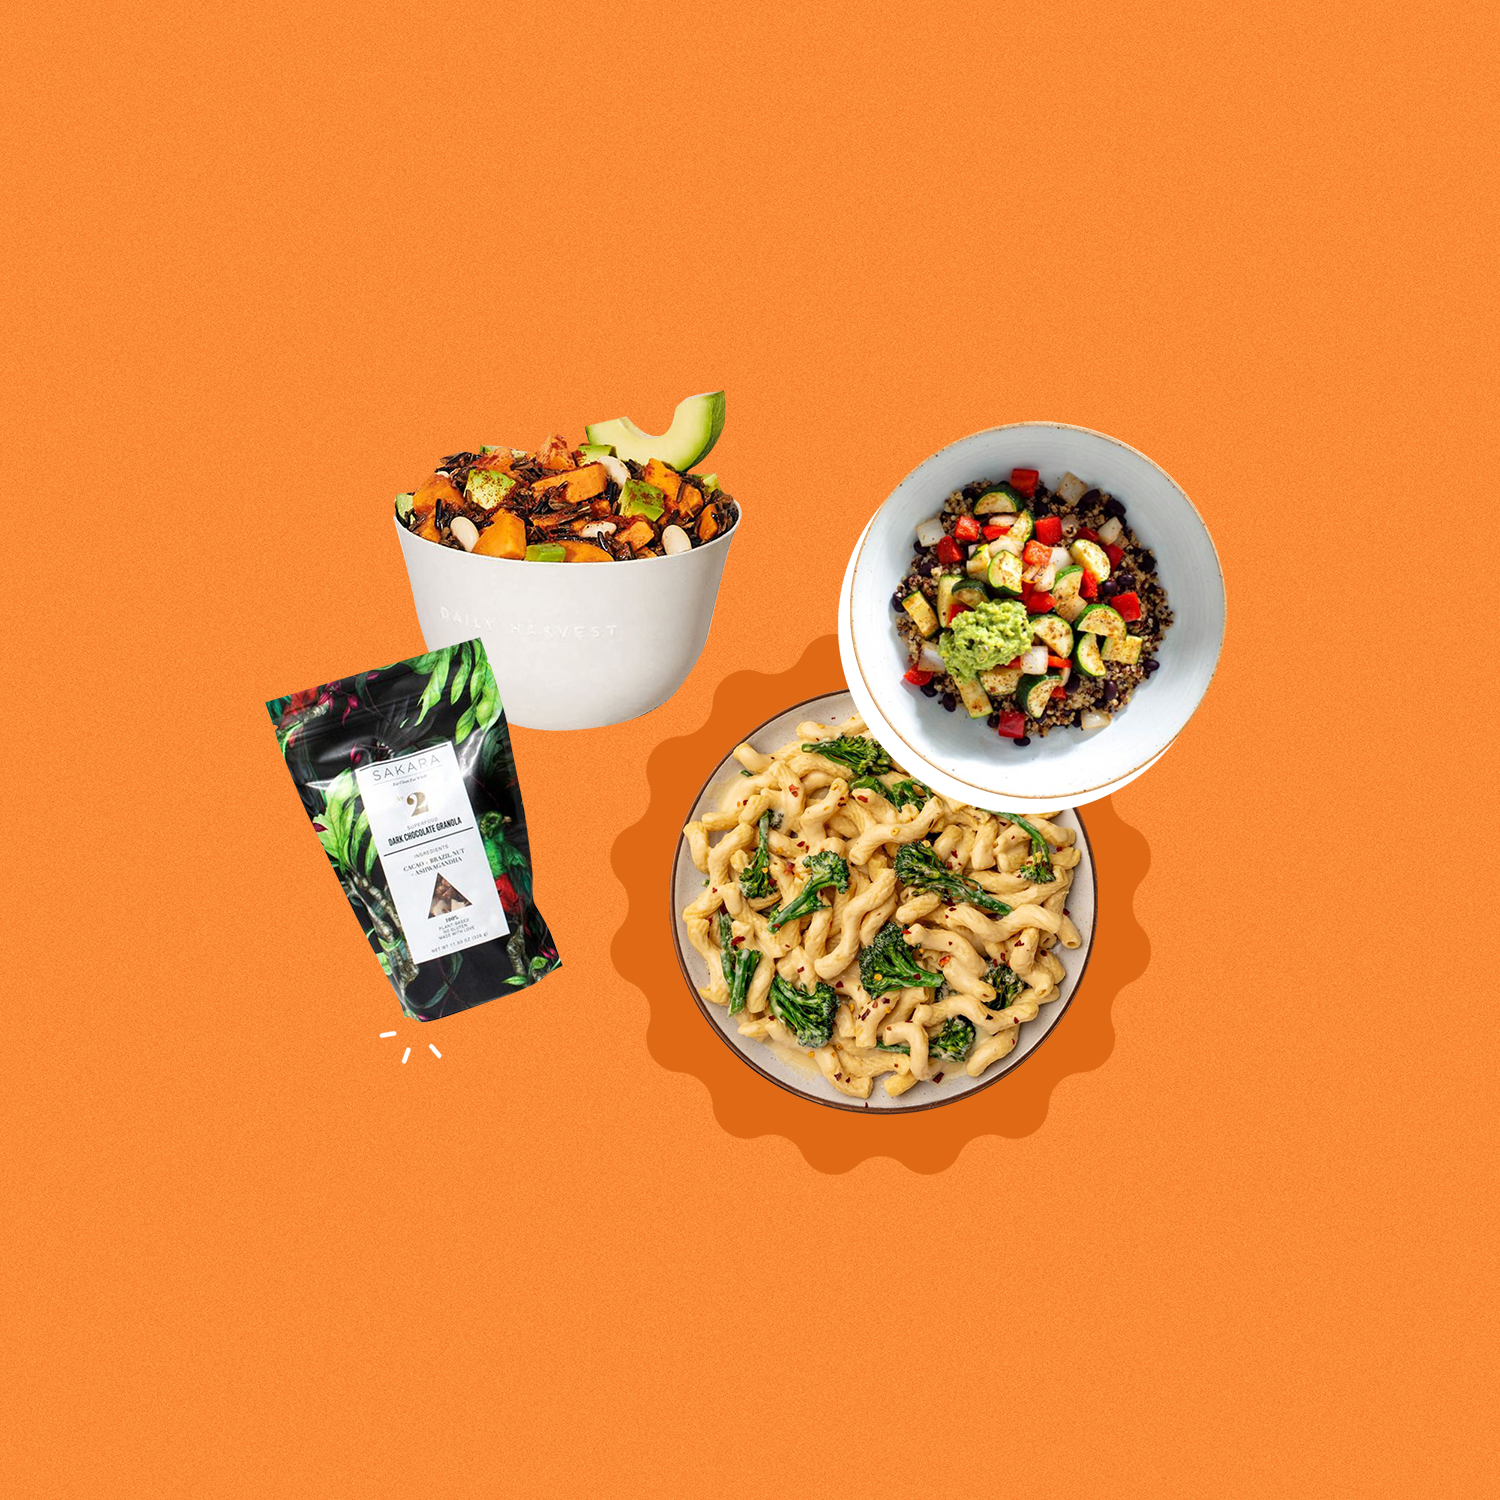 Hungryroot Review 2022: Plant-Based Meal Delivery Service